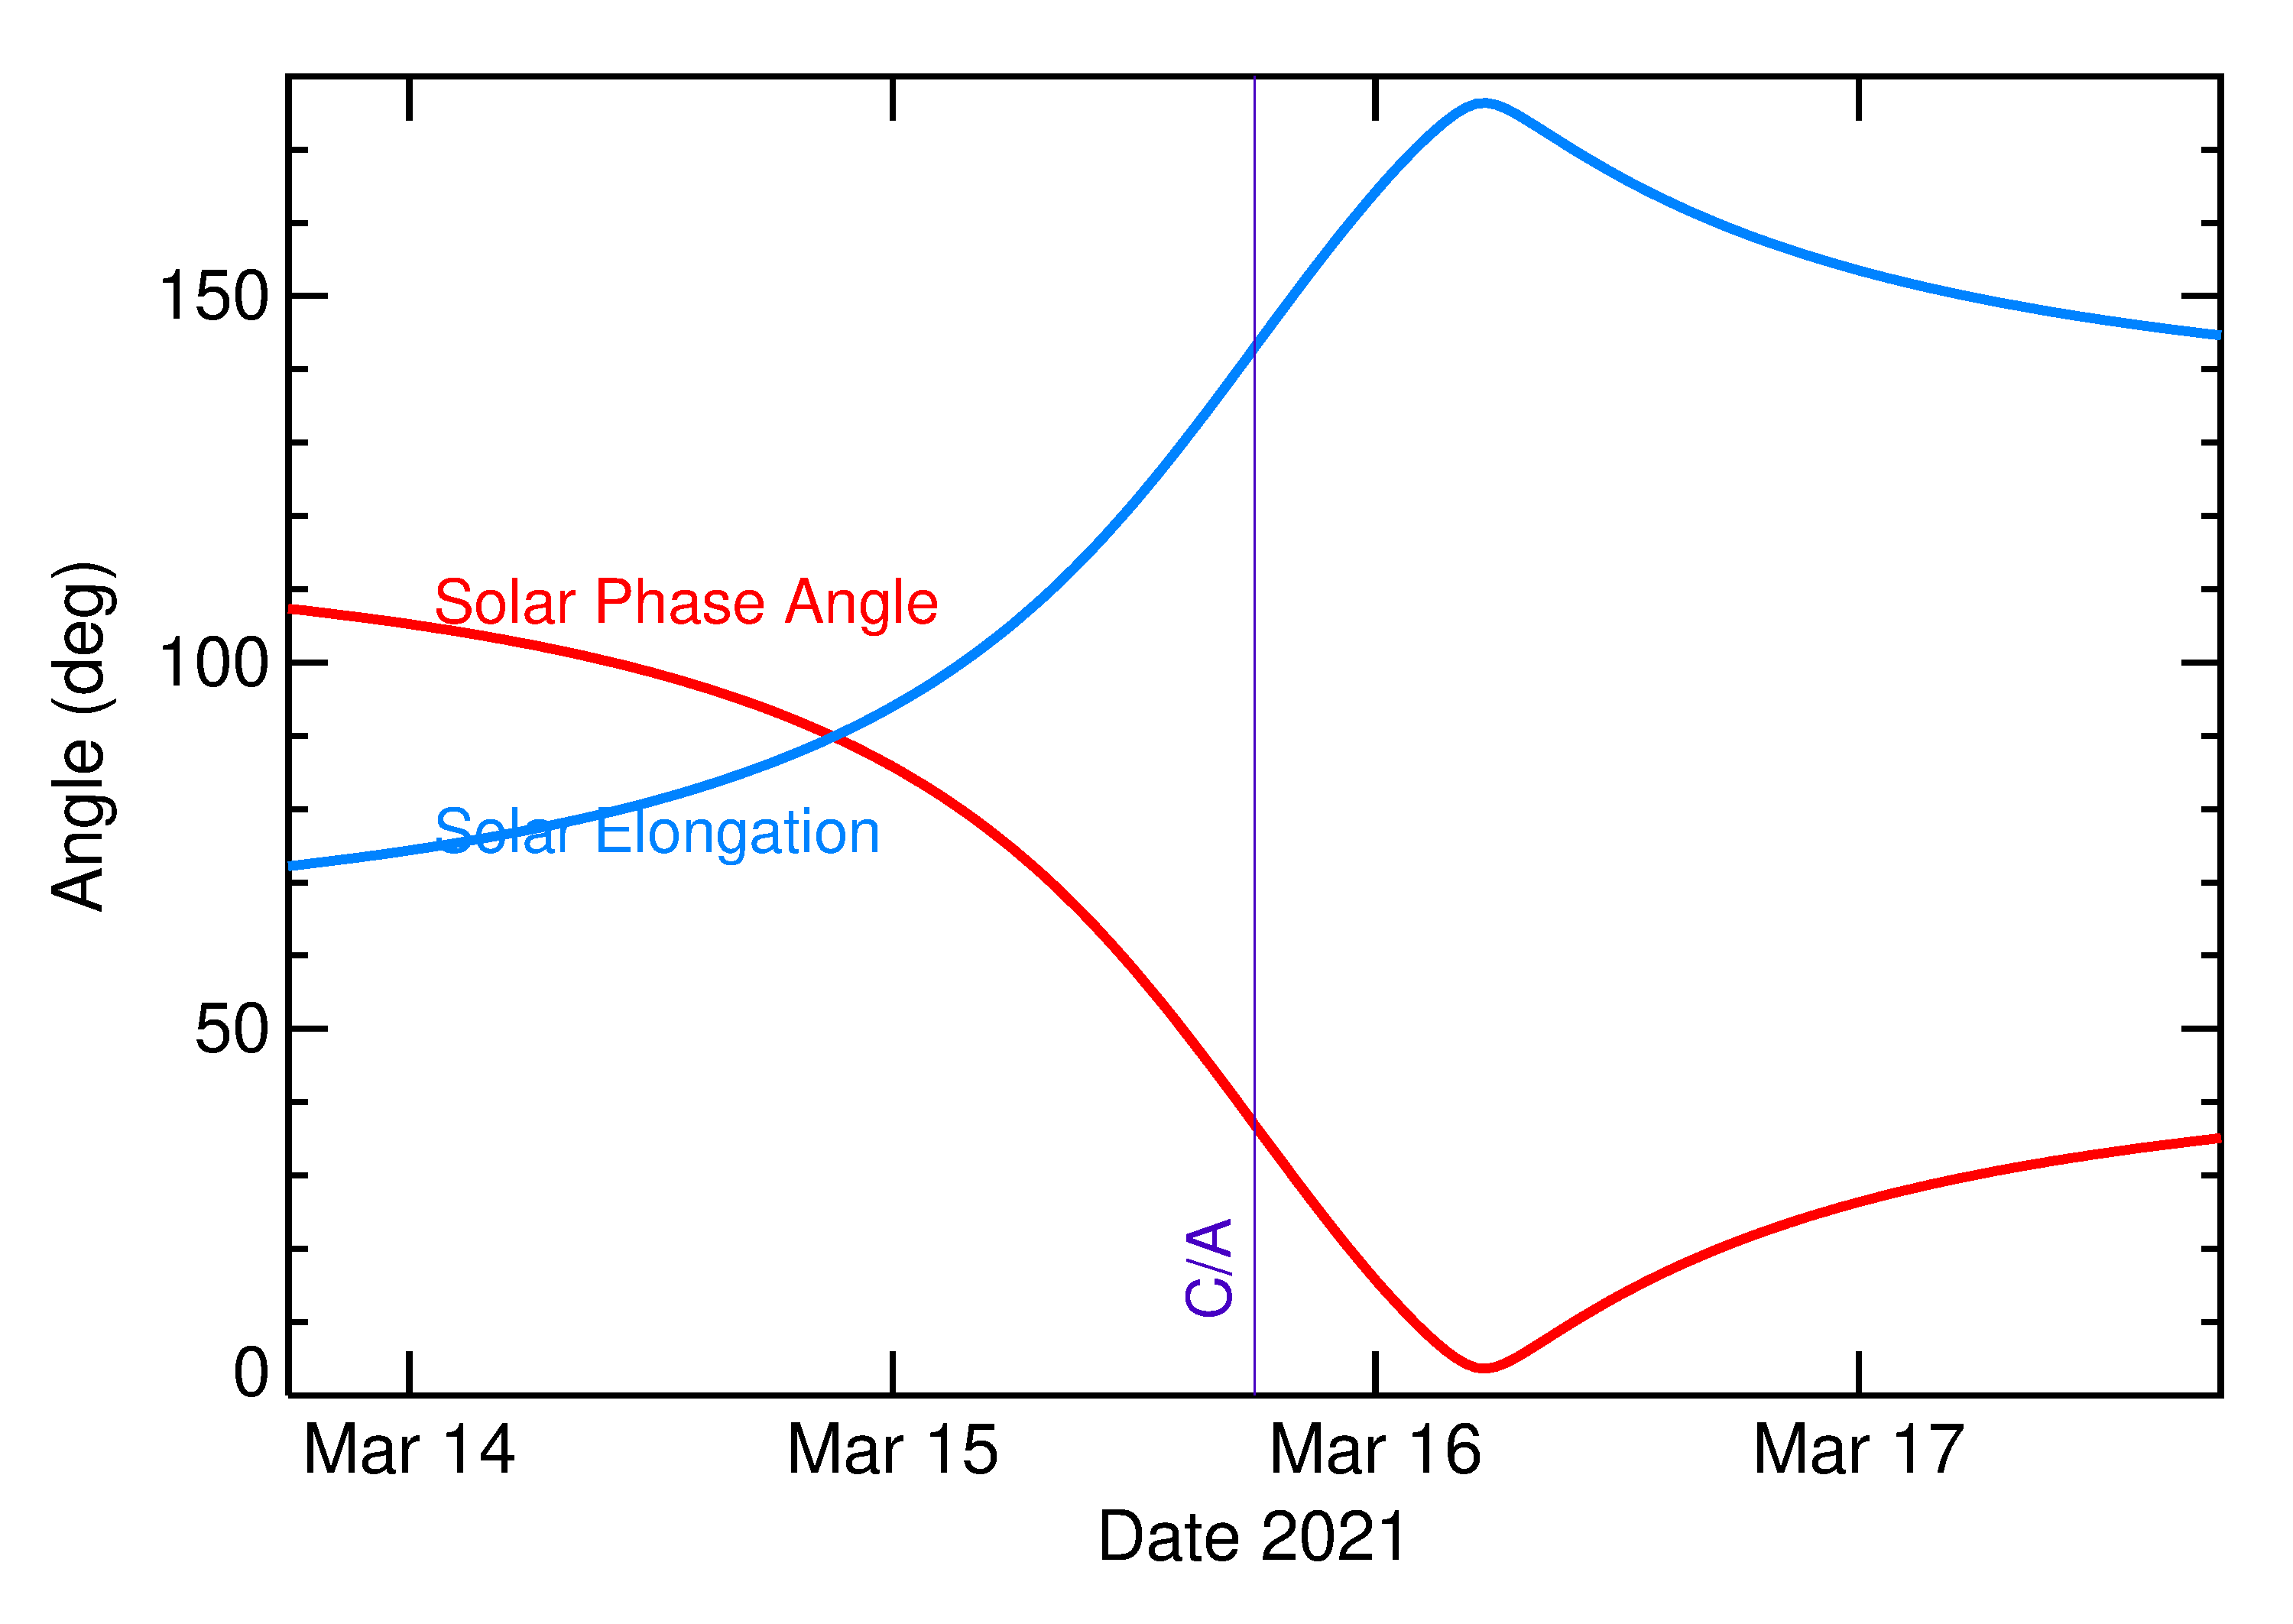 Solar Elongation and Solar Phase Angle of 2021 EP4 in the days around closest approach